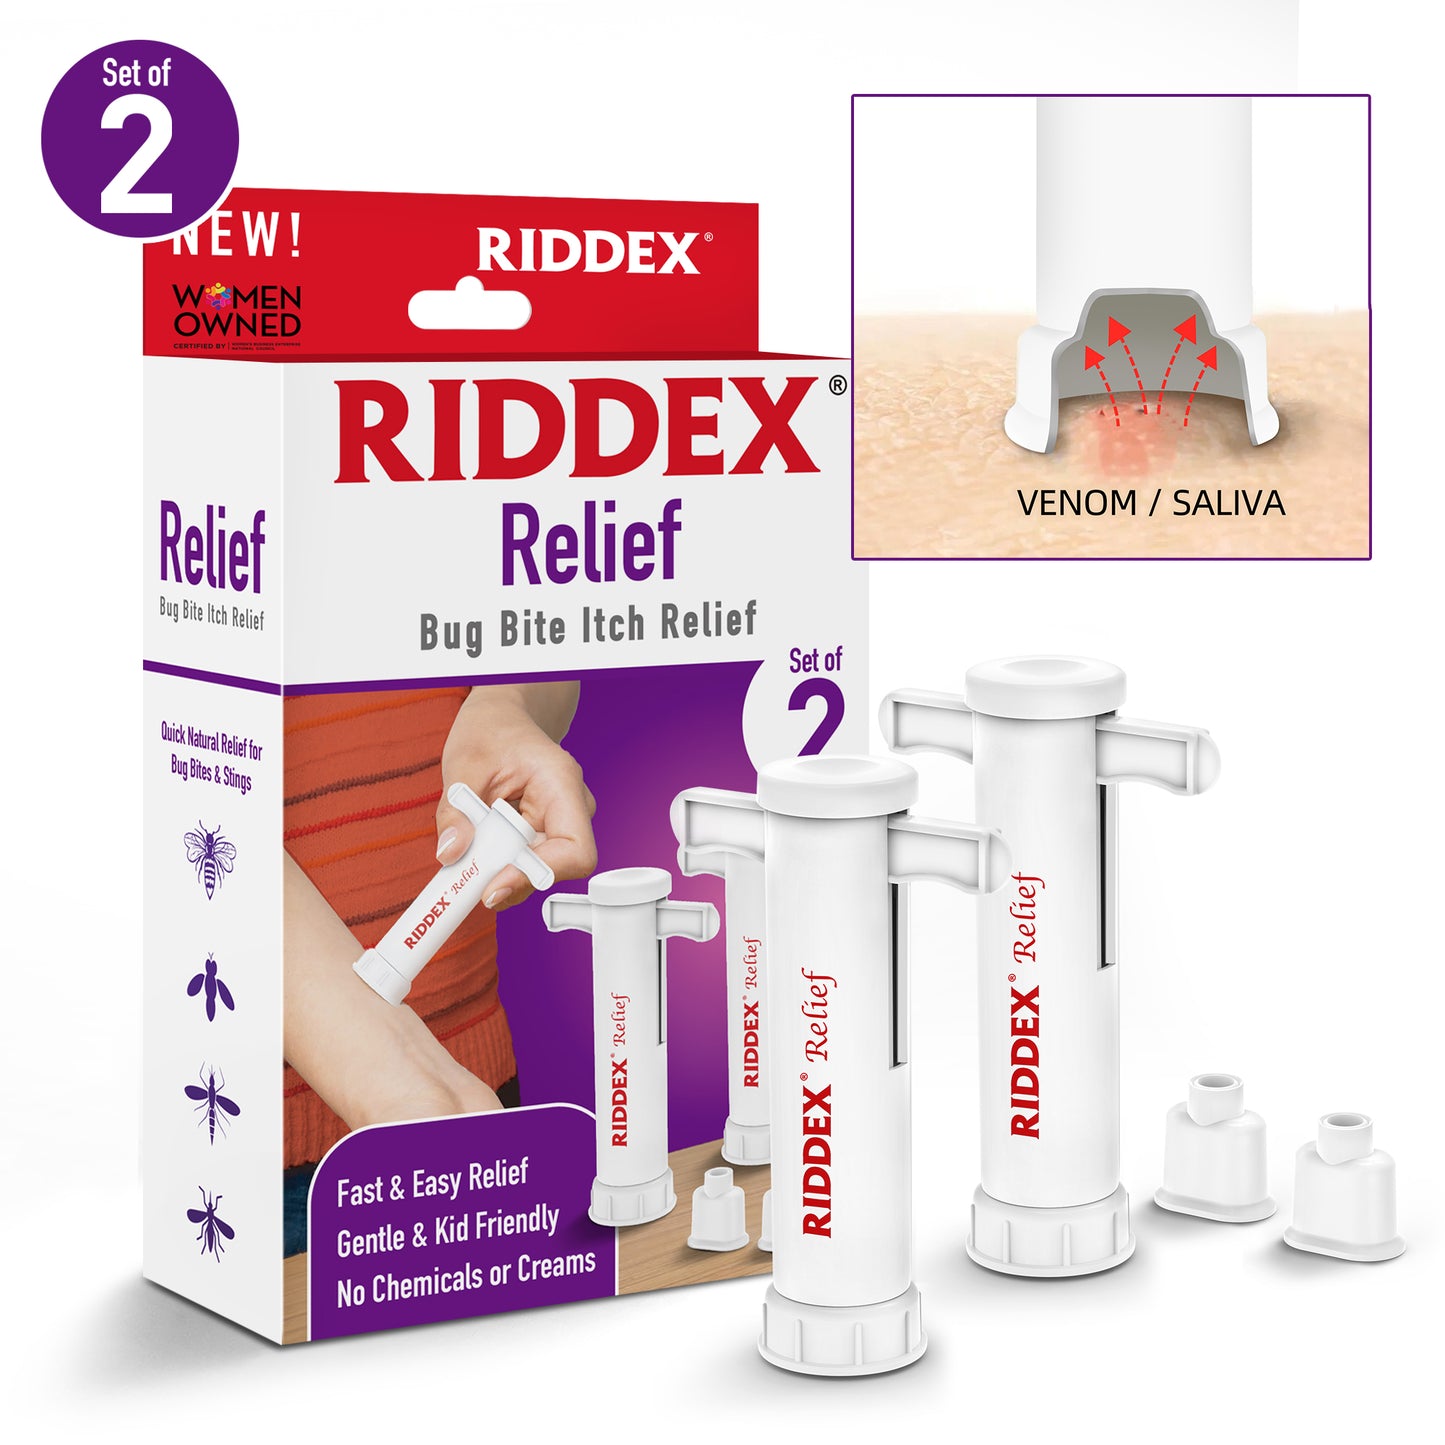 Riddex Relief 2 Pack standing next to package